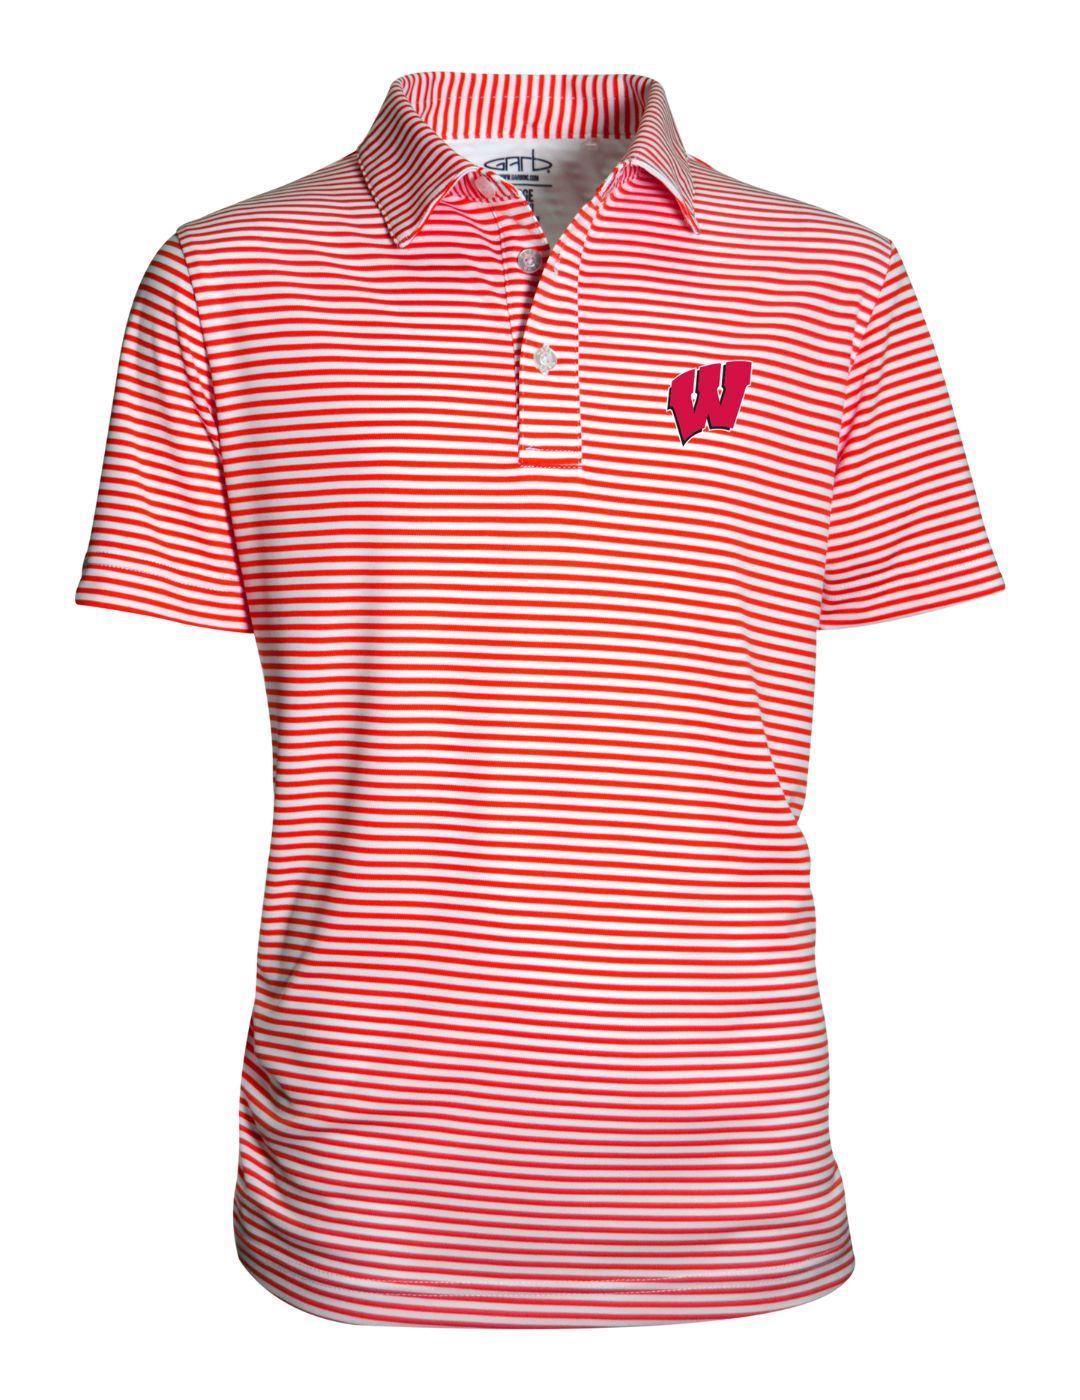 Wisconsin Badgers Youth Boys' Polo